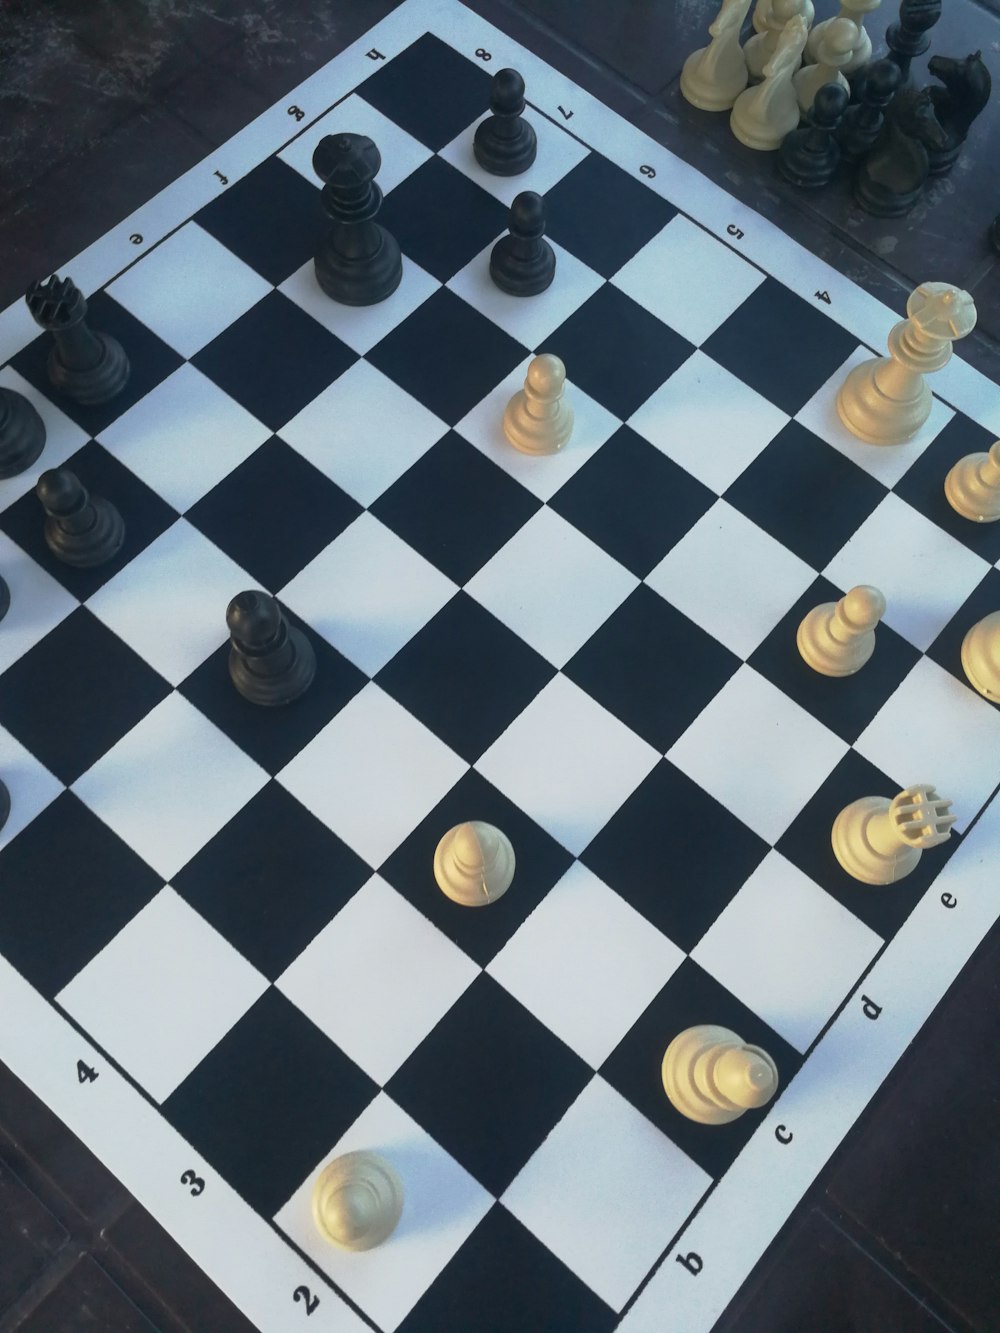 a black and white chess board with chess pieces on it